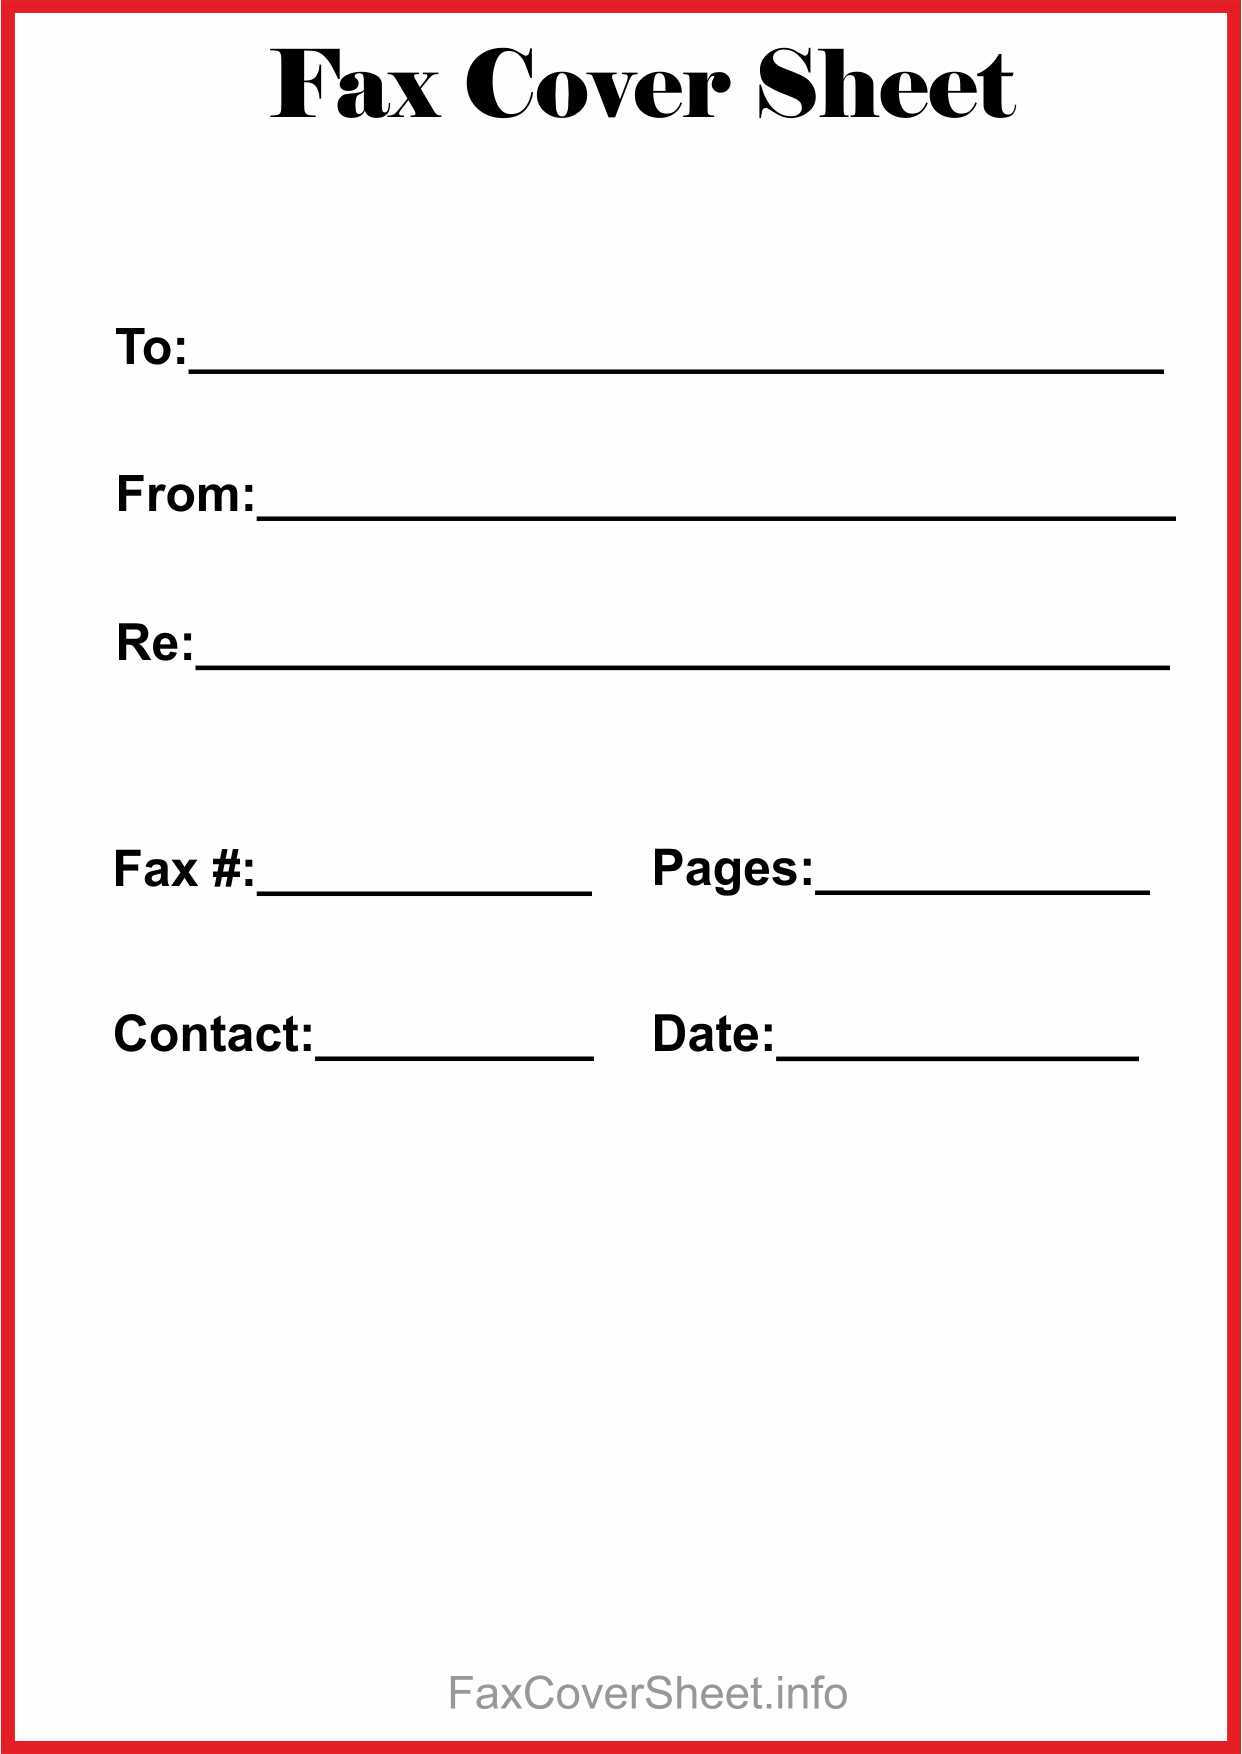 How To Find Blank Fax Cover Sheet Within Microsoft Word For Fax Template Word 2010